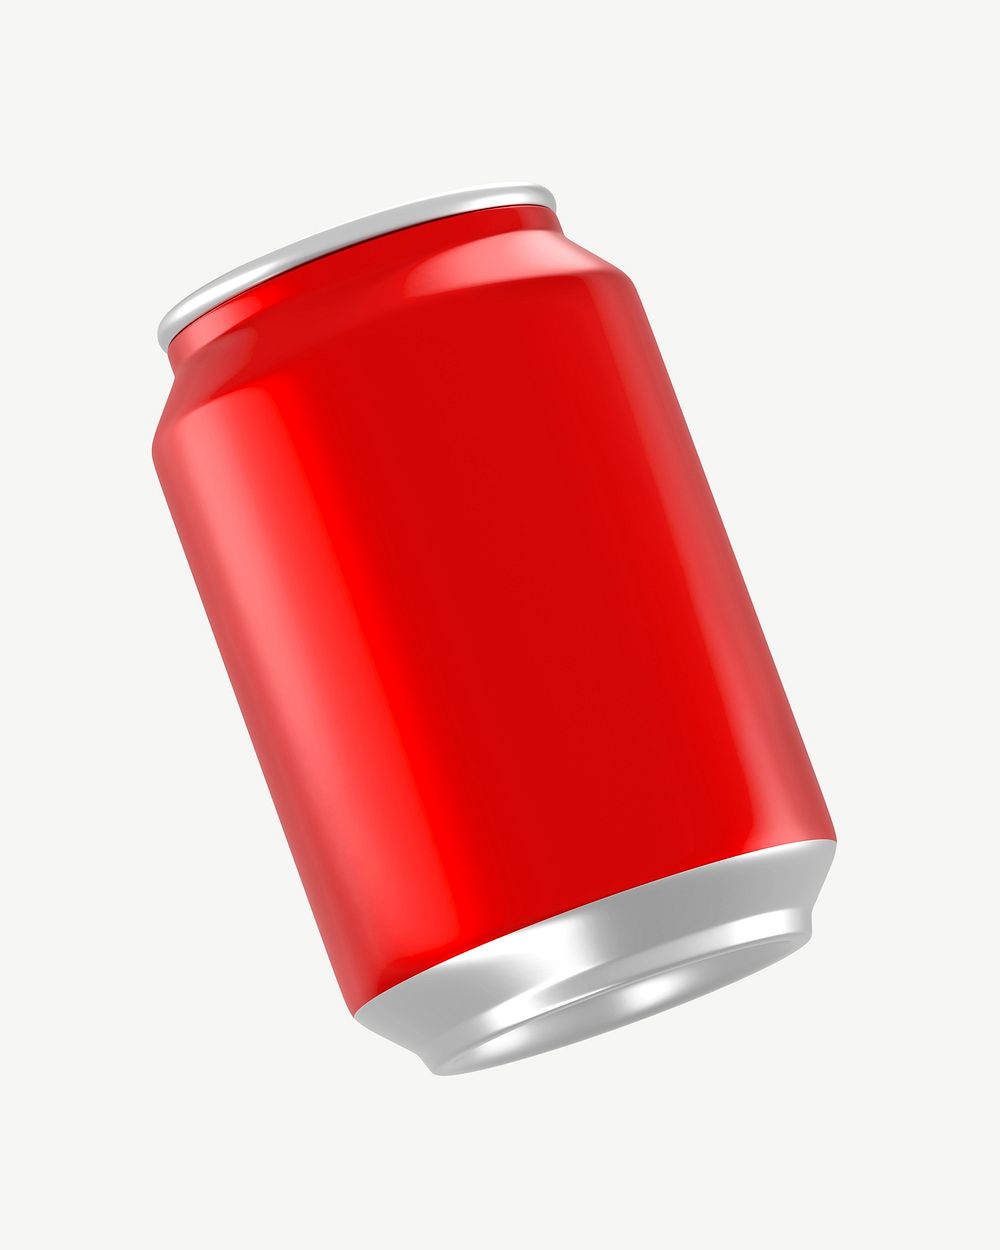 3D red soda can, collage element psd